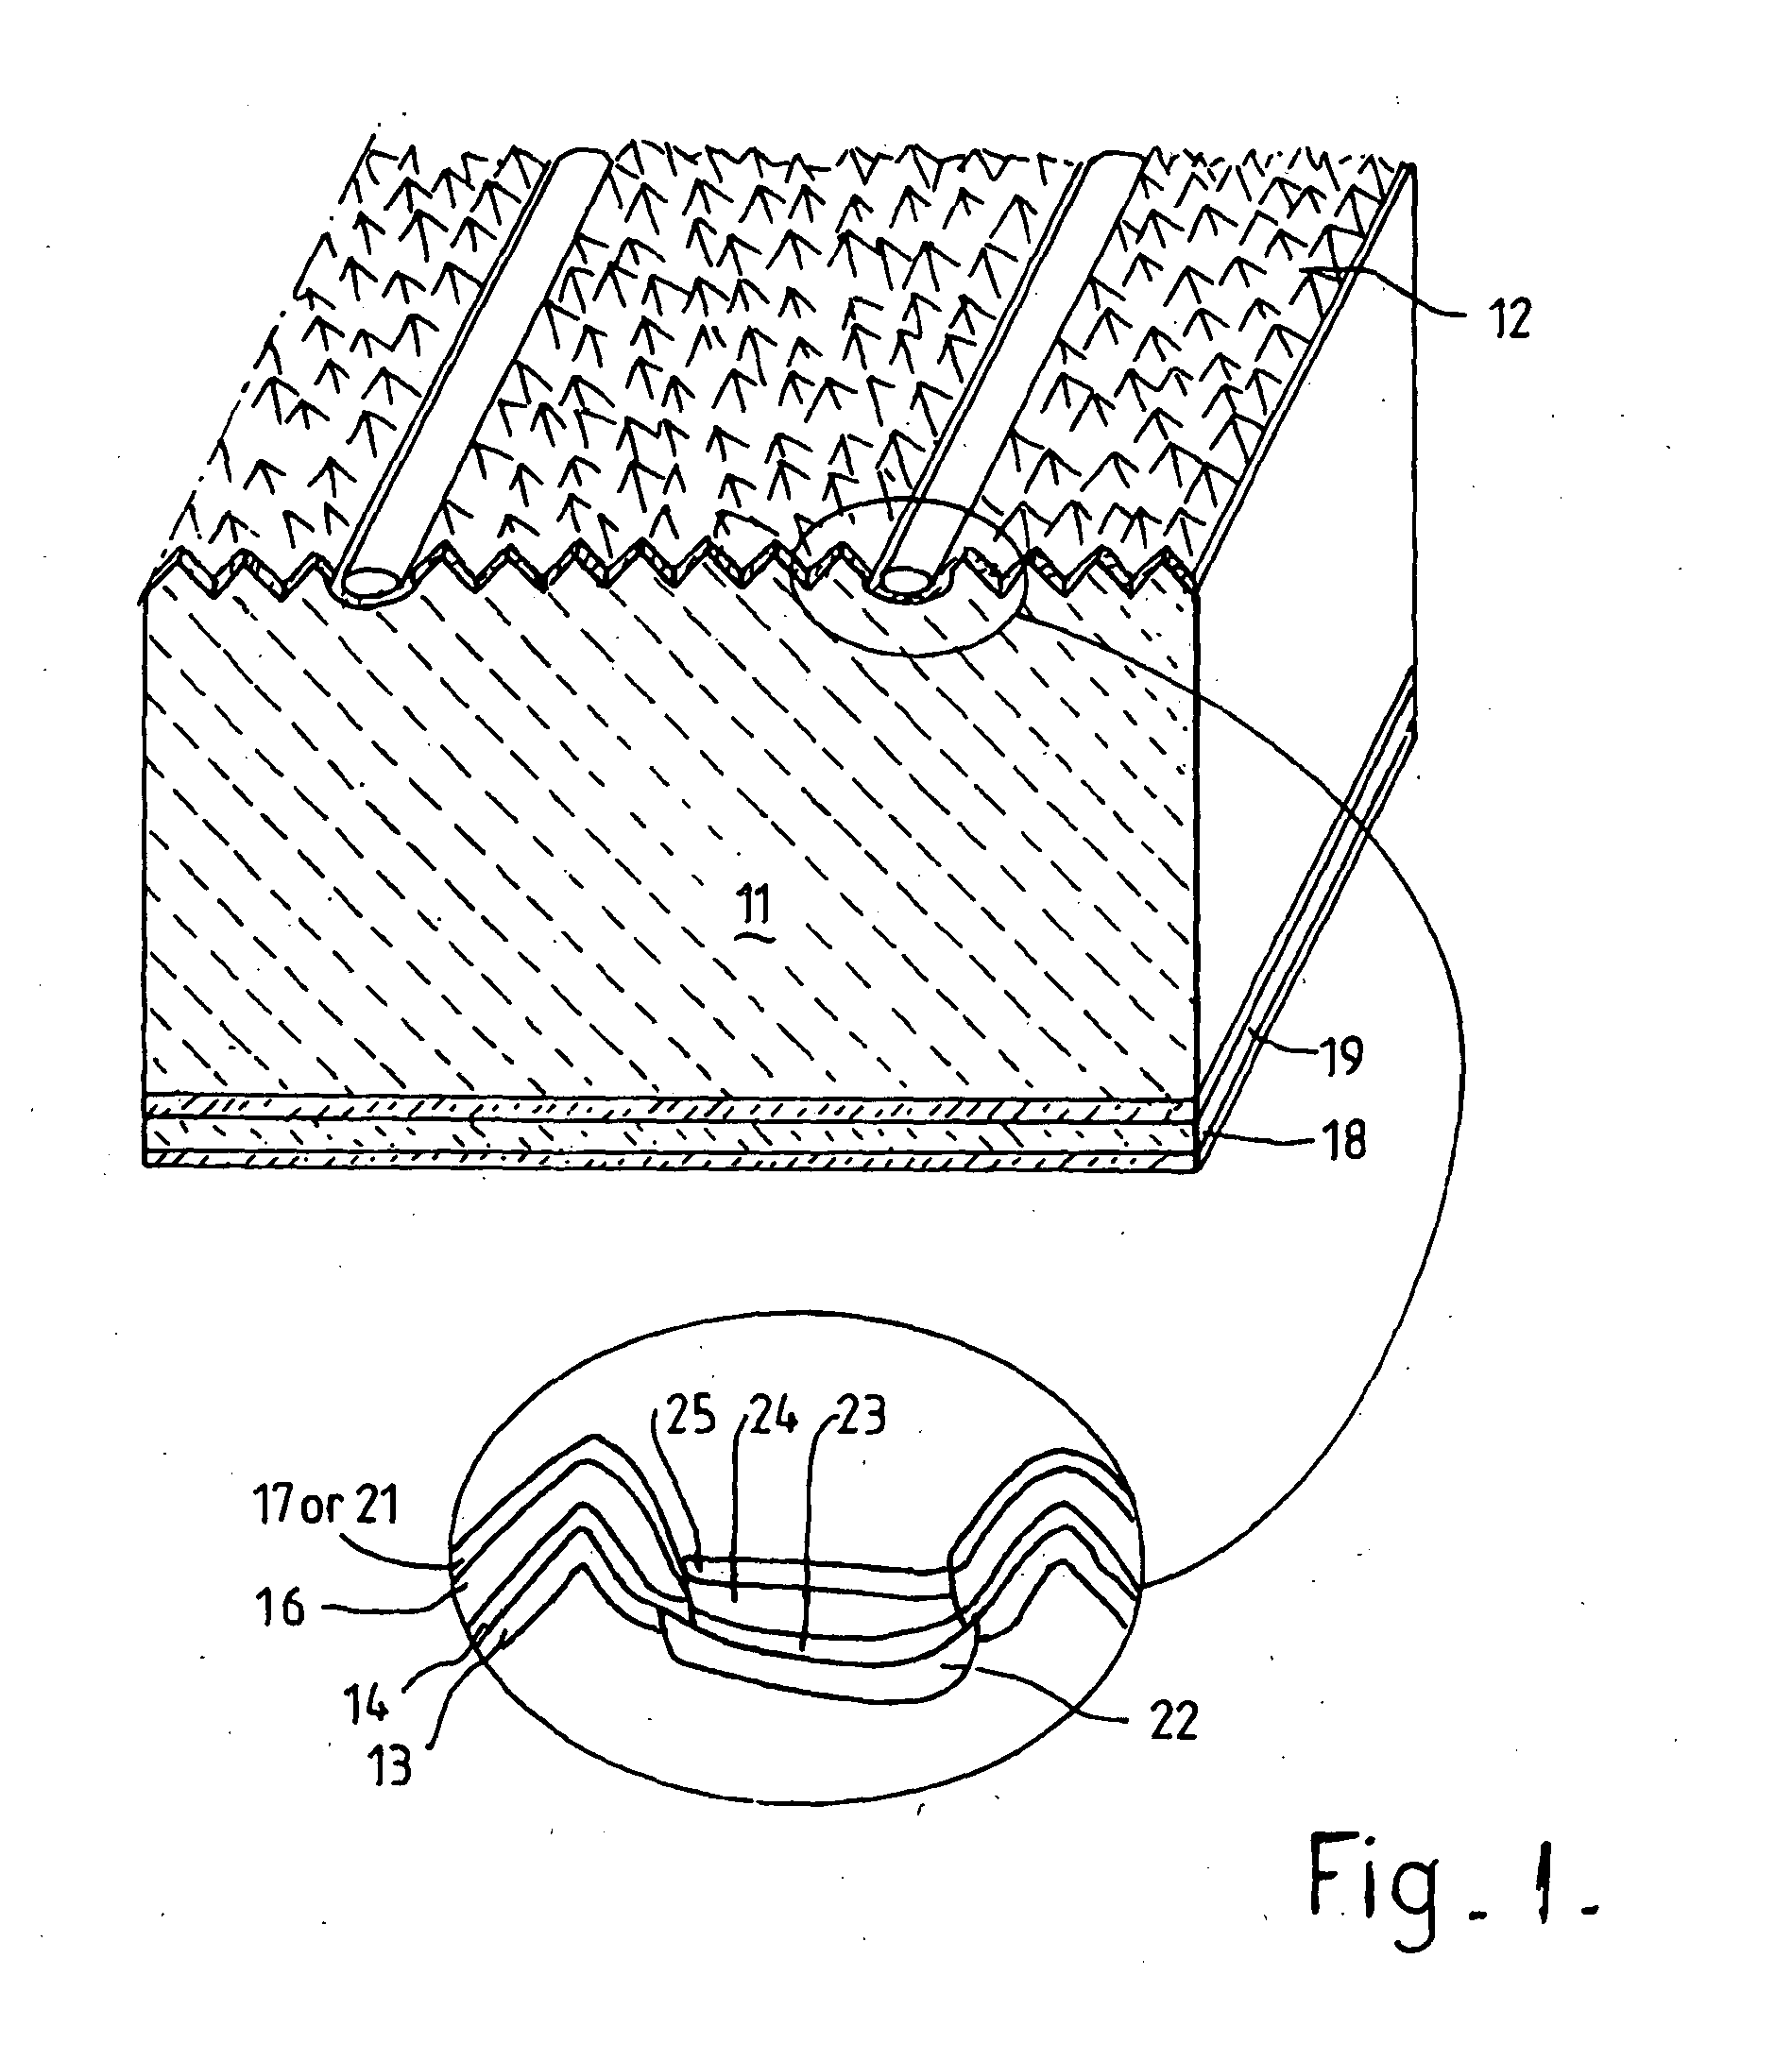 Photovoltaic device structure and method